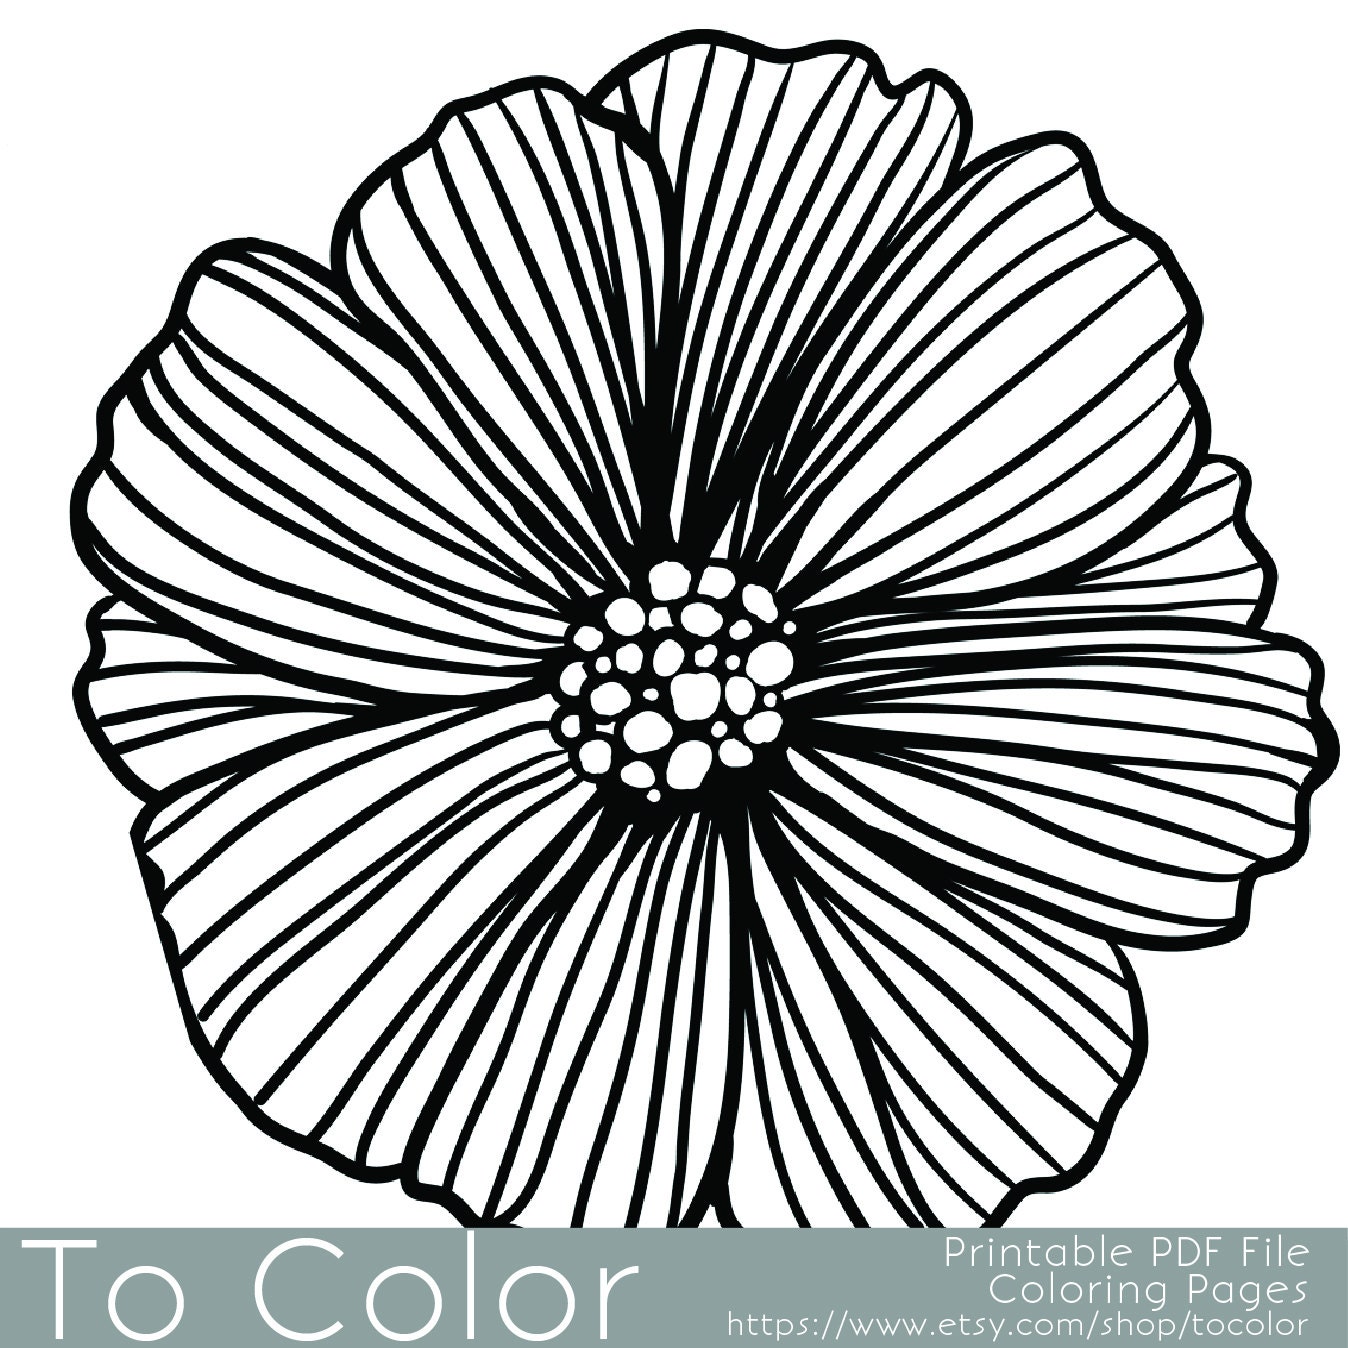 Printable Flower Coloring Page for Adults PDF / JPG Instant